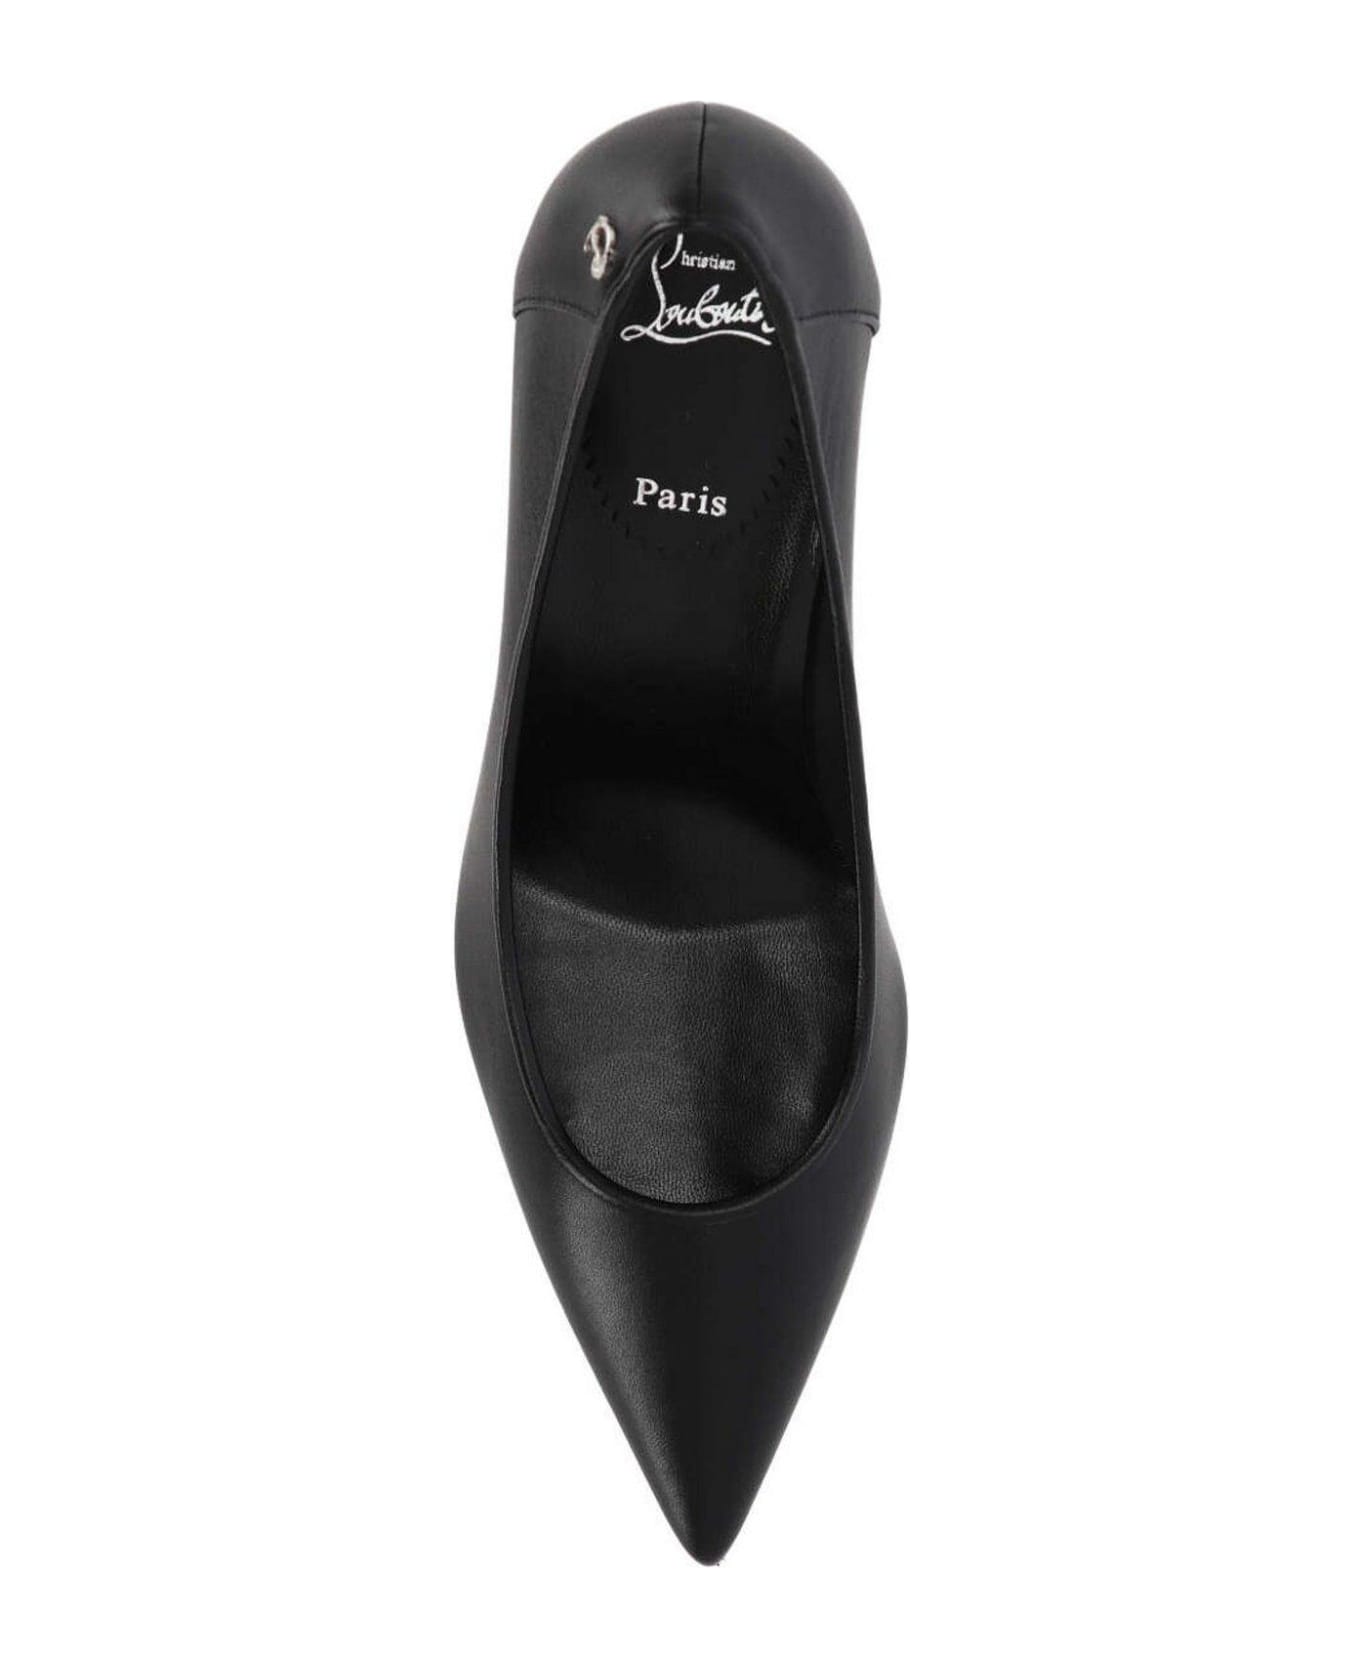 Christian Louboutin Pointed-toe Pumps - BLACK